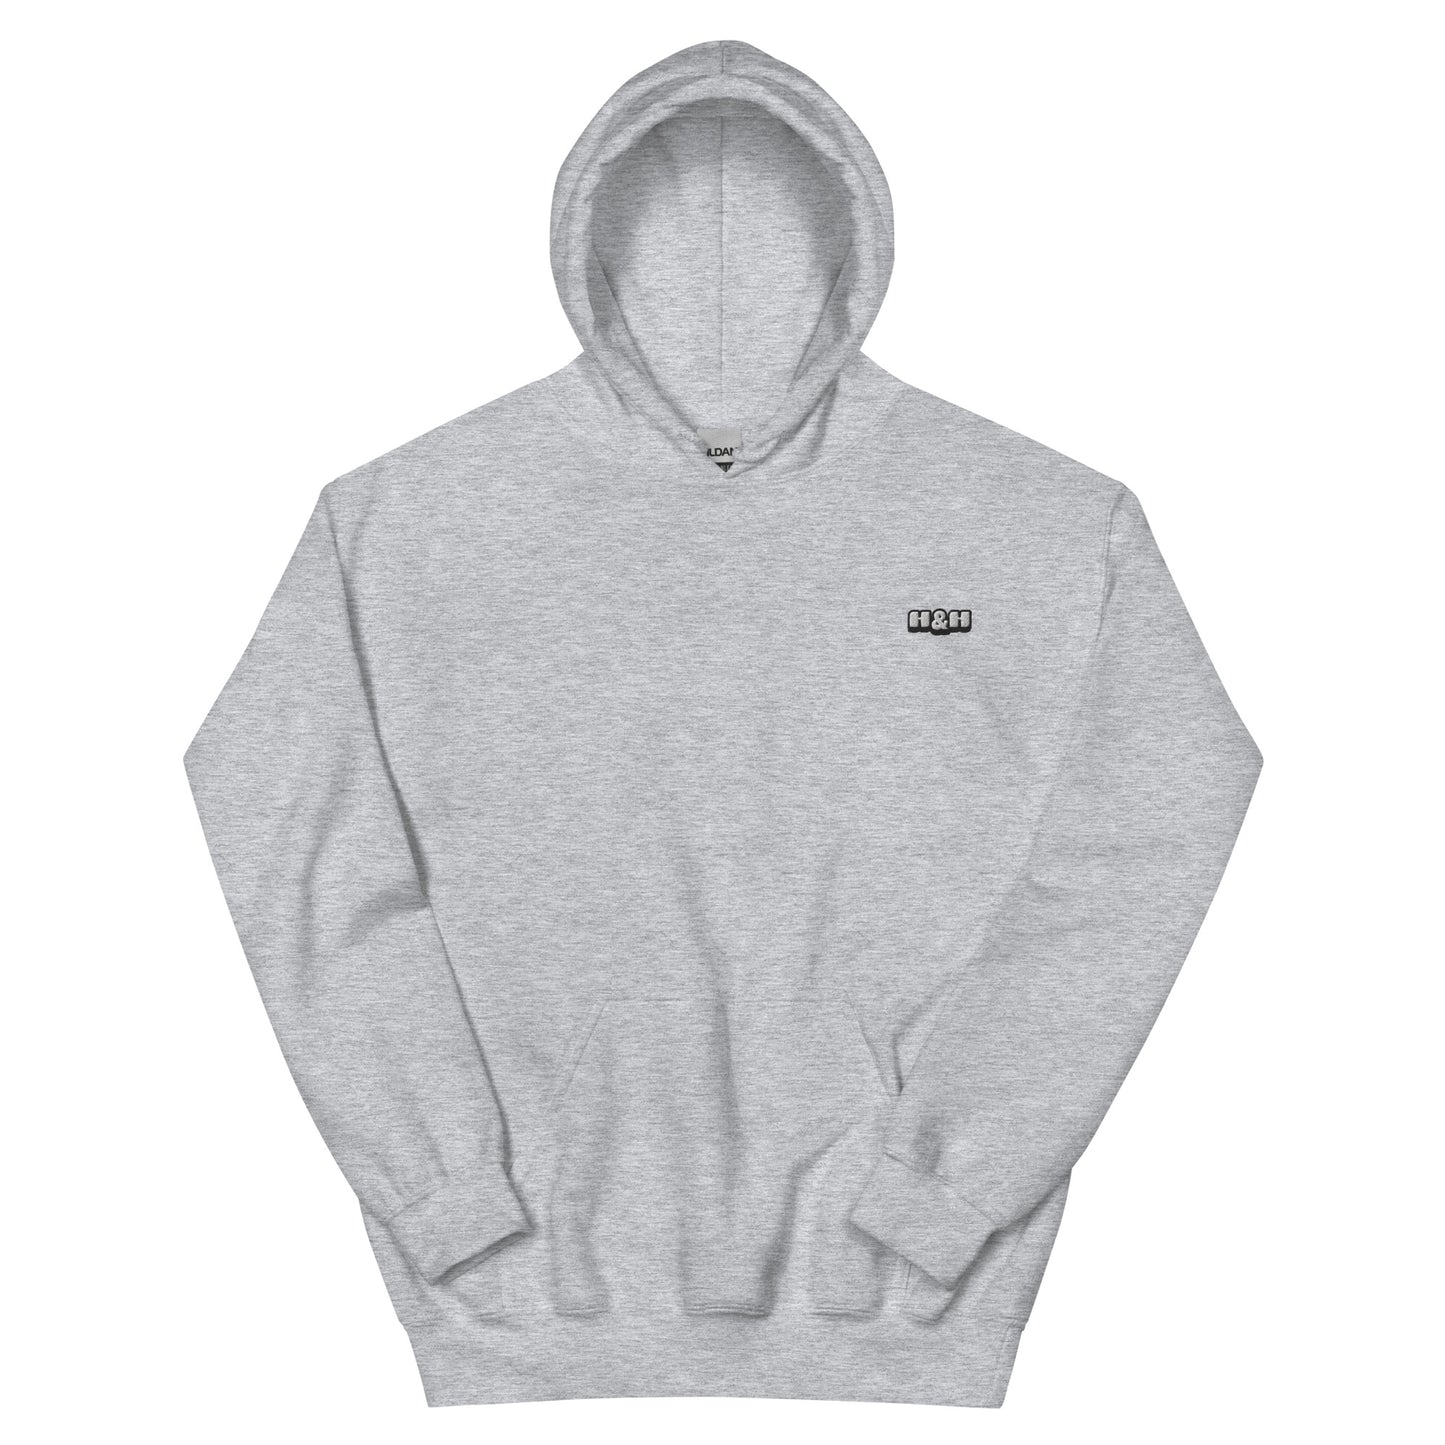 Yours Hoodie